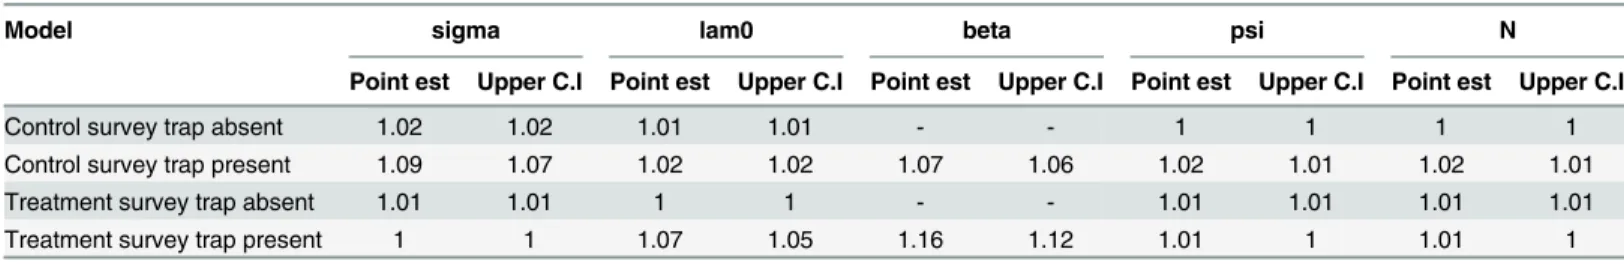 Table 4. Shrink reduction factors generated using the Rubin-Gelman diagnostic in R.